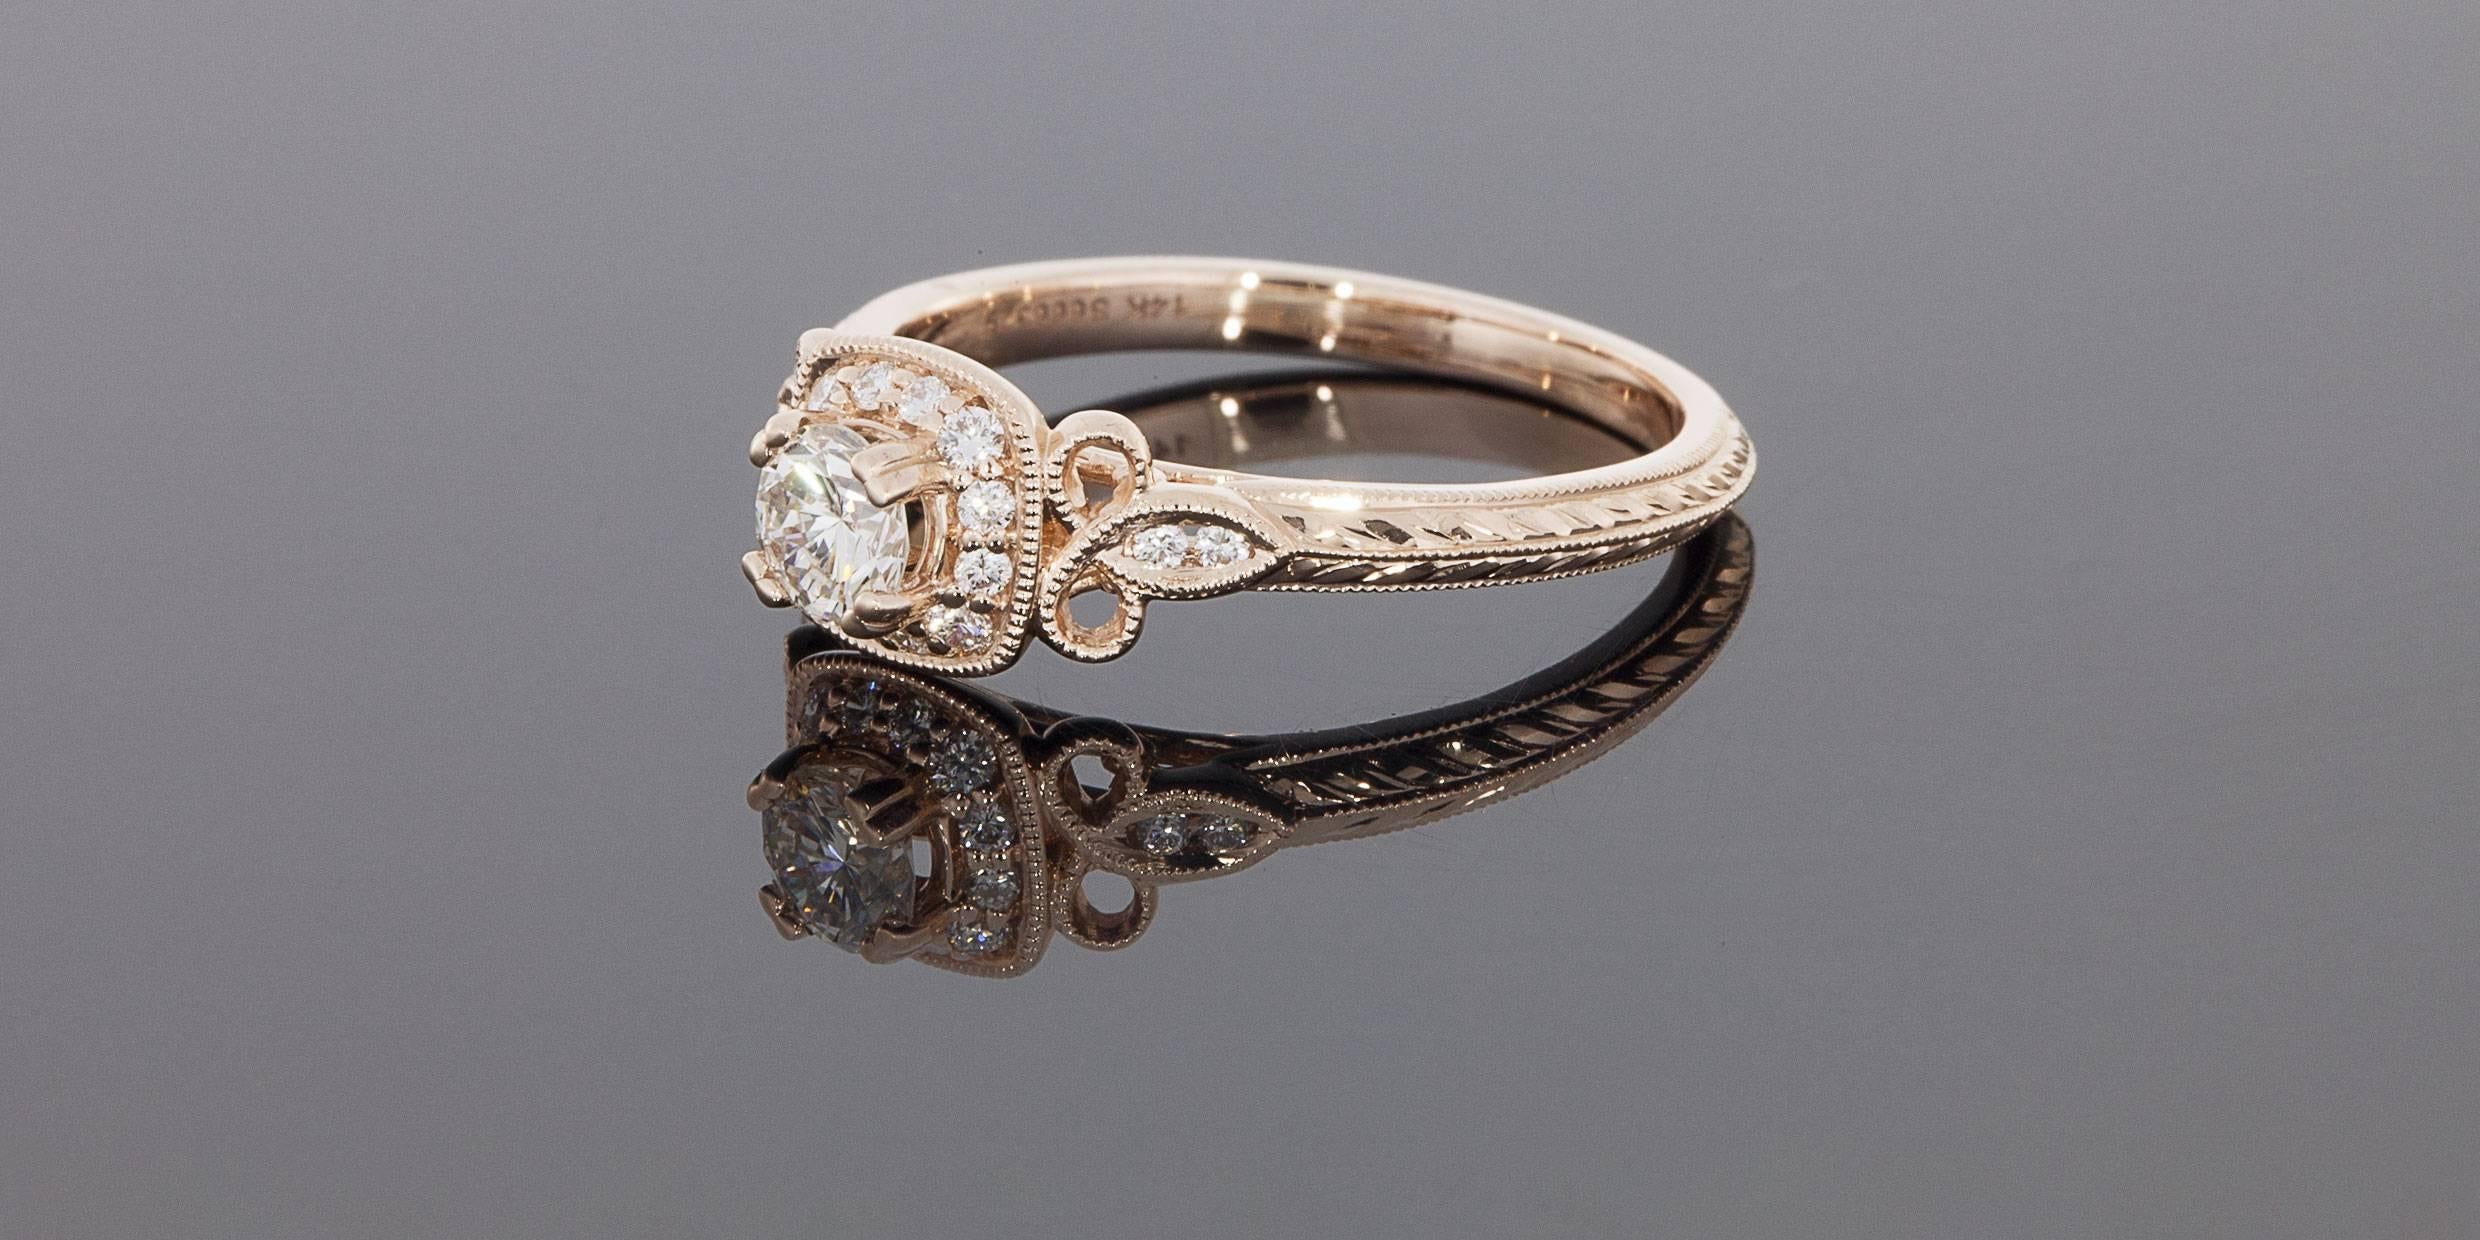 This beautiful rose gold engagement ring has lovely, intricate details all over. The center diamond is a .30 carat round brilliant cut that is J/VS2 in quality. It is split prong set & surrounded by a cushion shaped, milgrain accented halo of bead